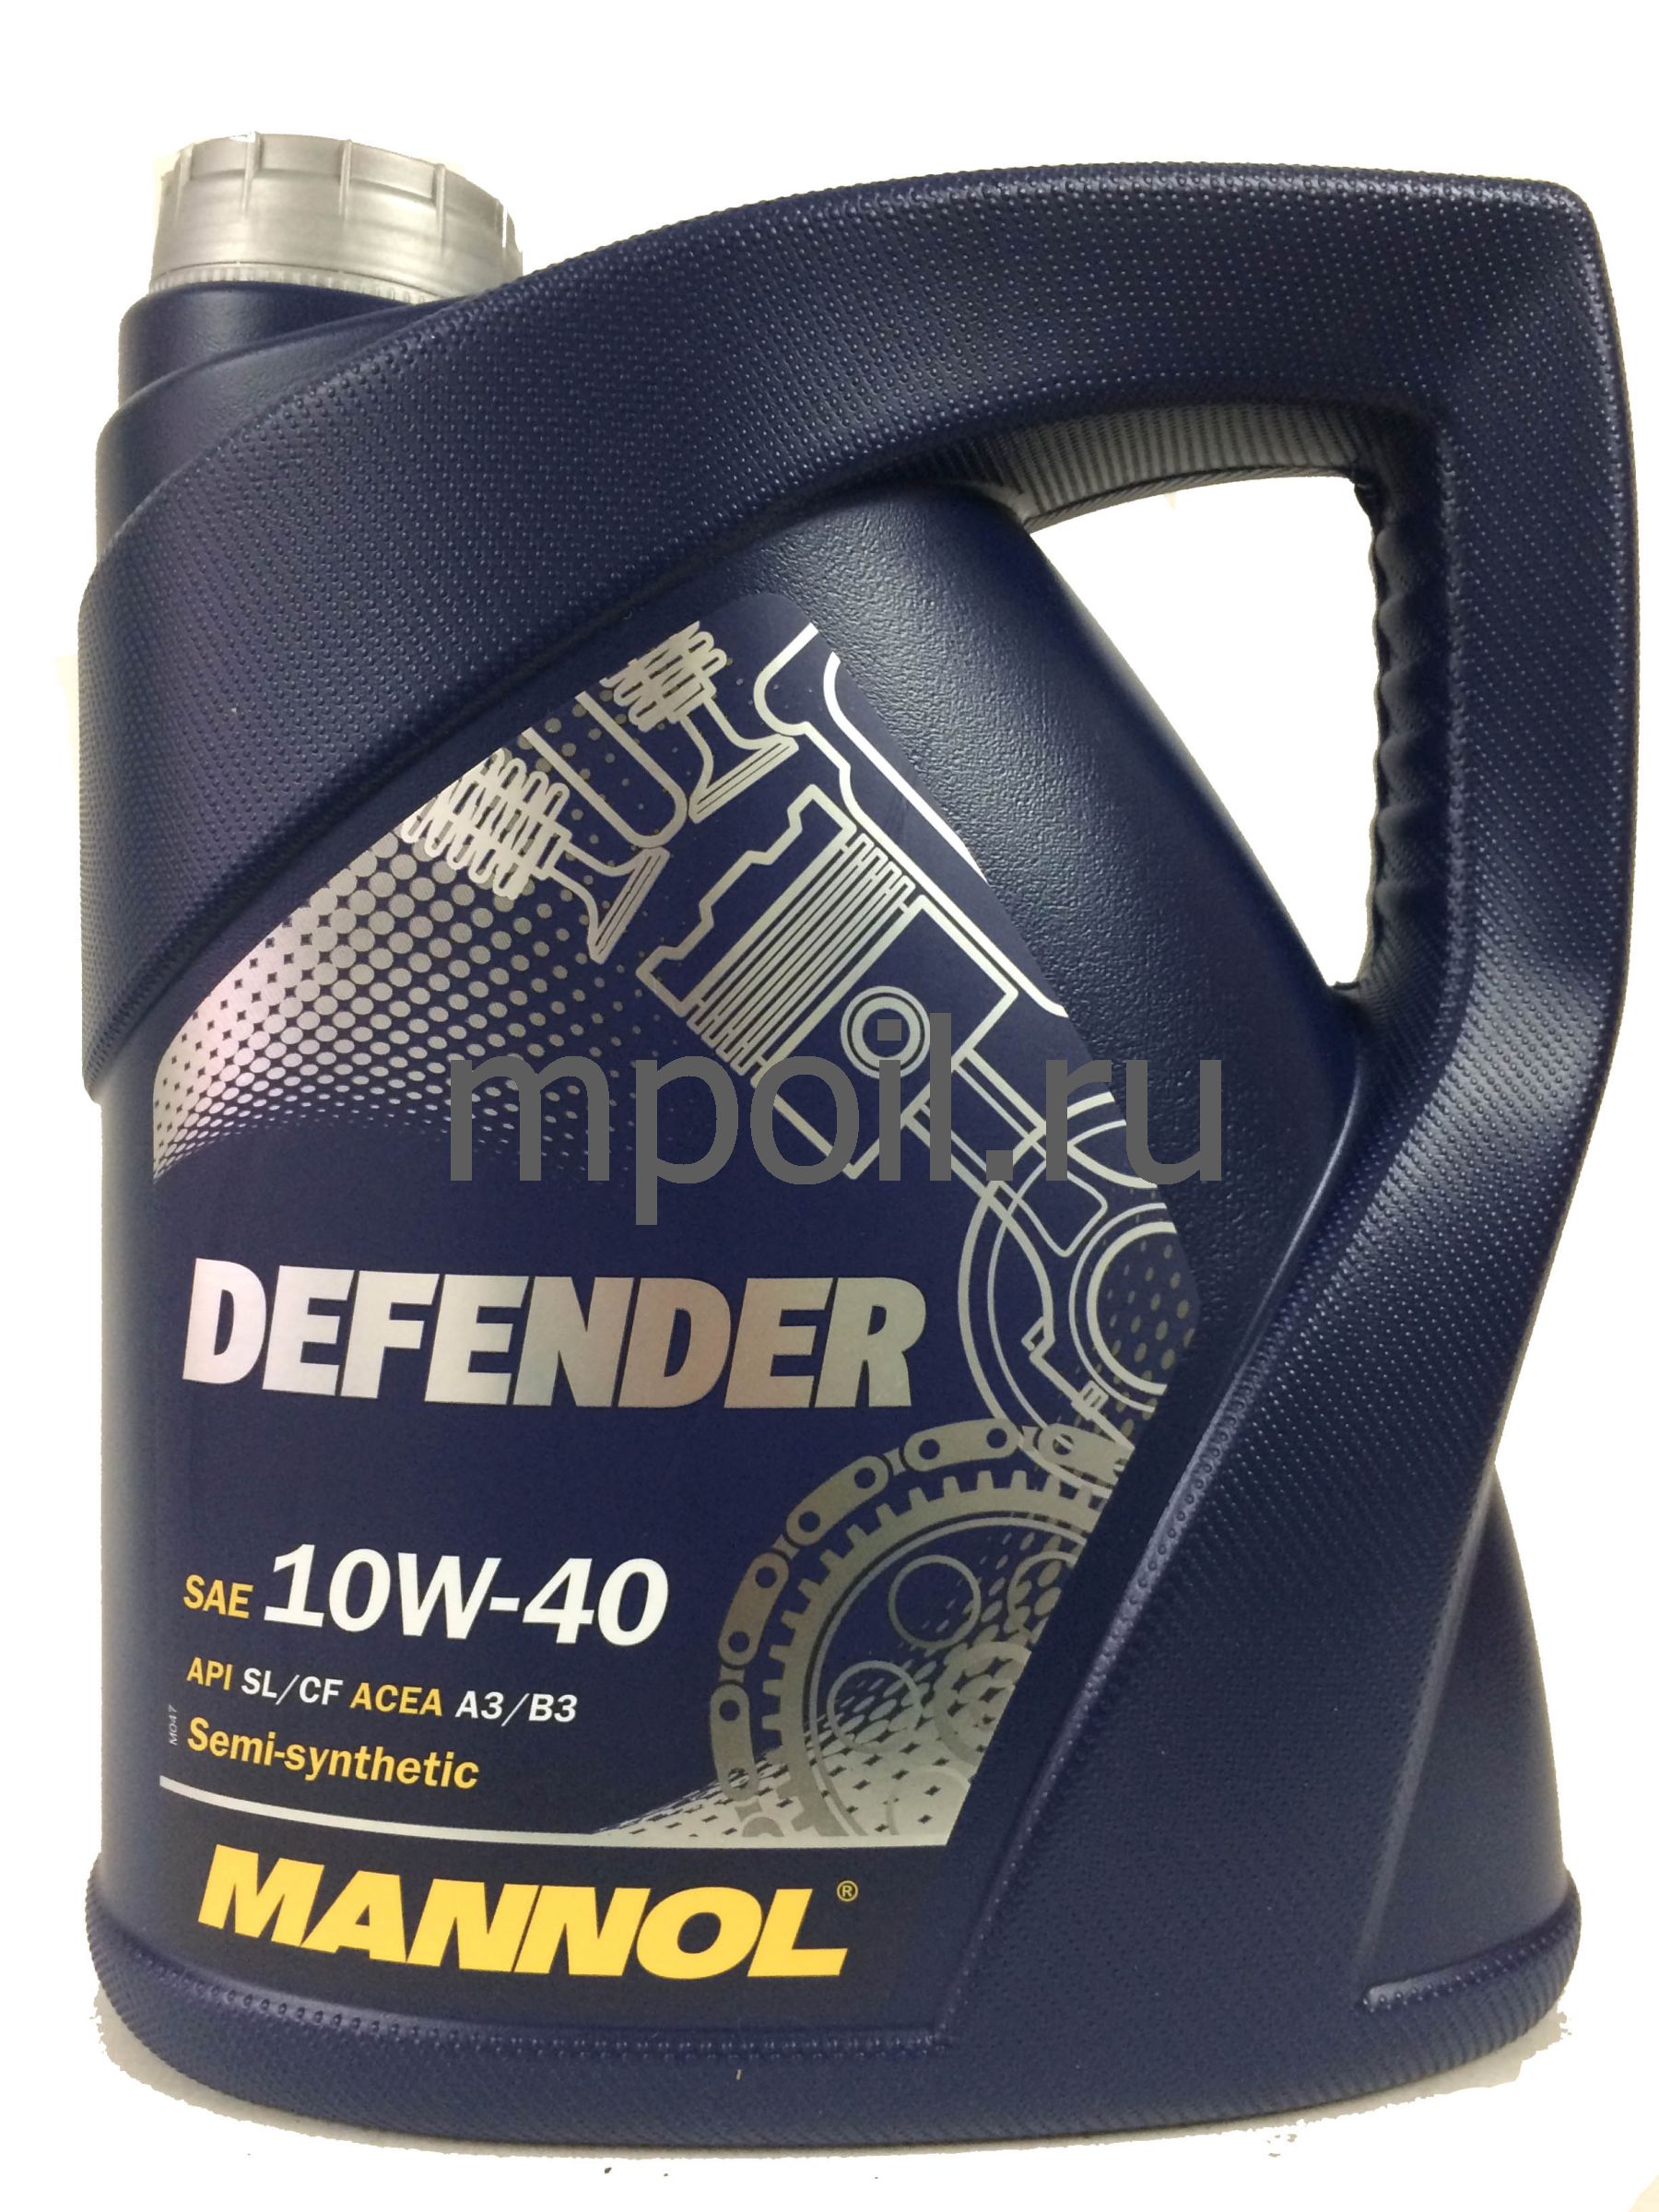 Defender oil. Моторное масло Mannol Classic 10w-40. Манол Defender 10w 40. Mannol 4022. Манол Дефендер 10-40 5л.